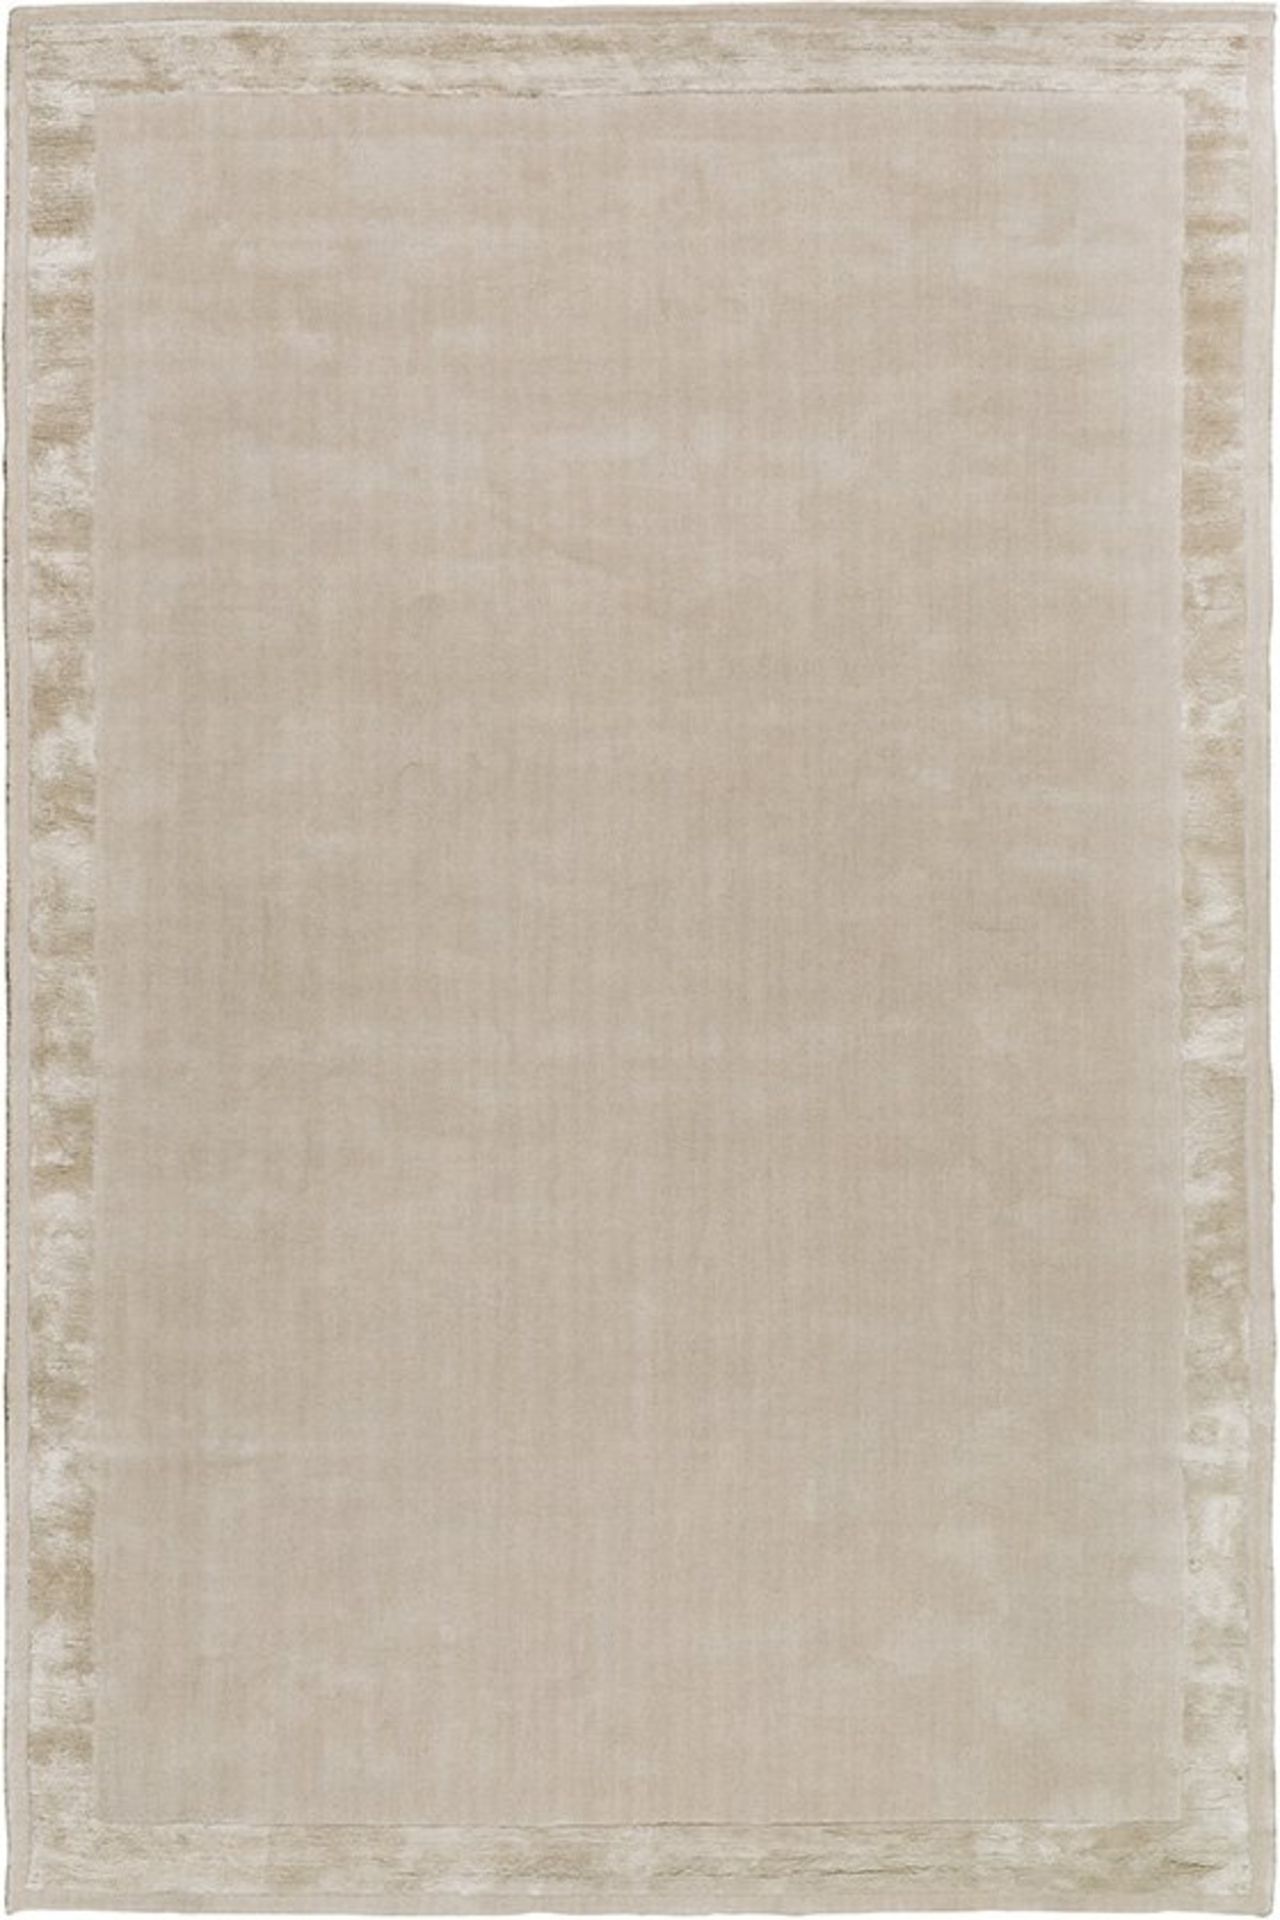 The Rug Company Holland Stone Exquisite Handloom Rugs. Made From A Beautiful Blend Of Wool And Silk, - Image 3 of 3